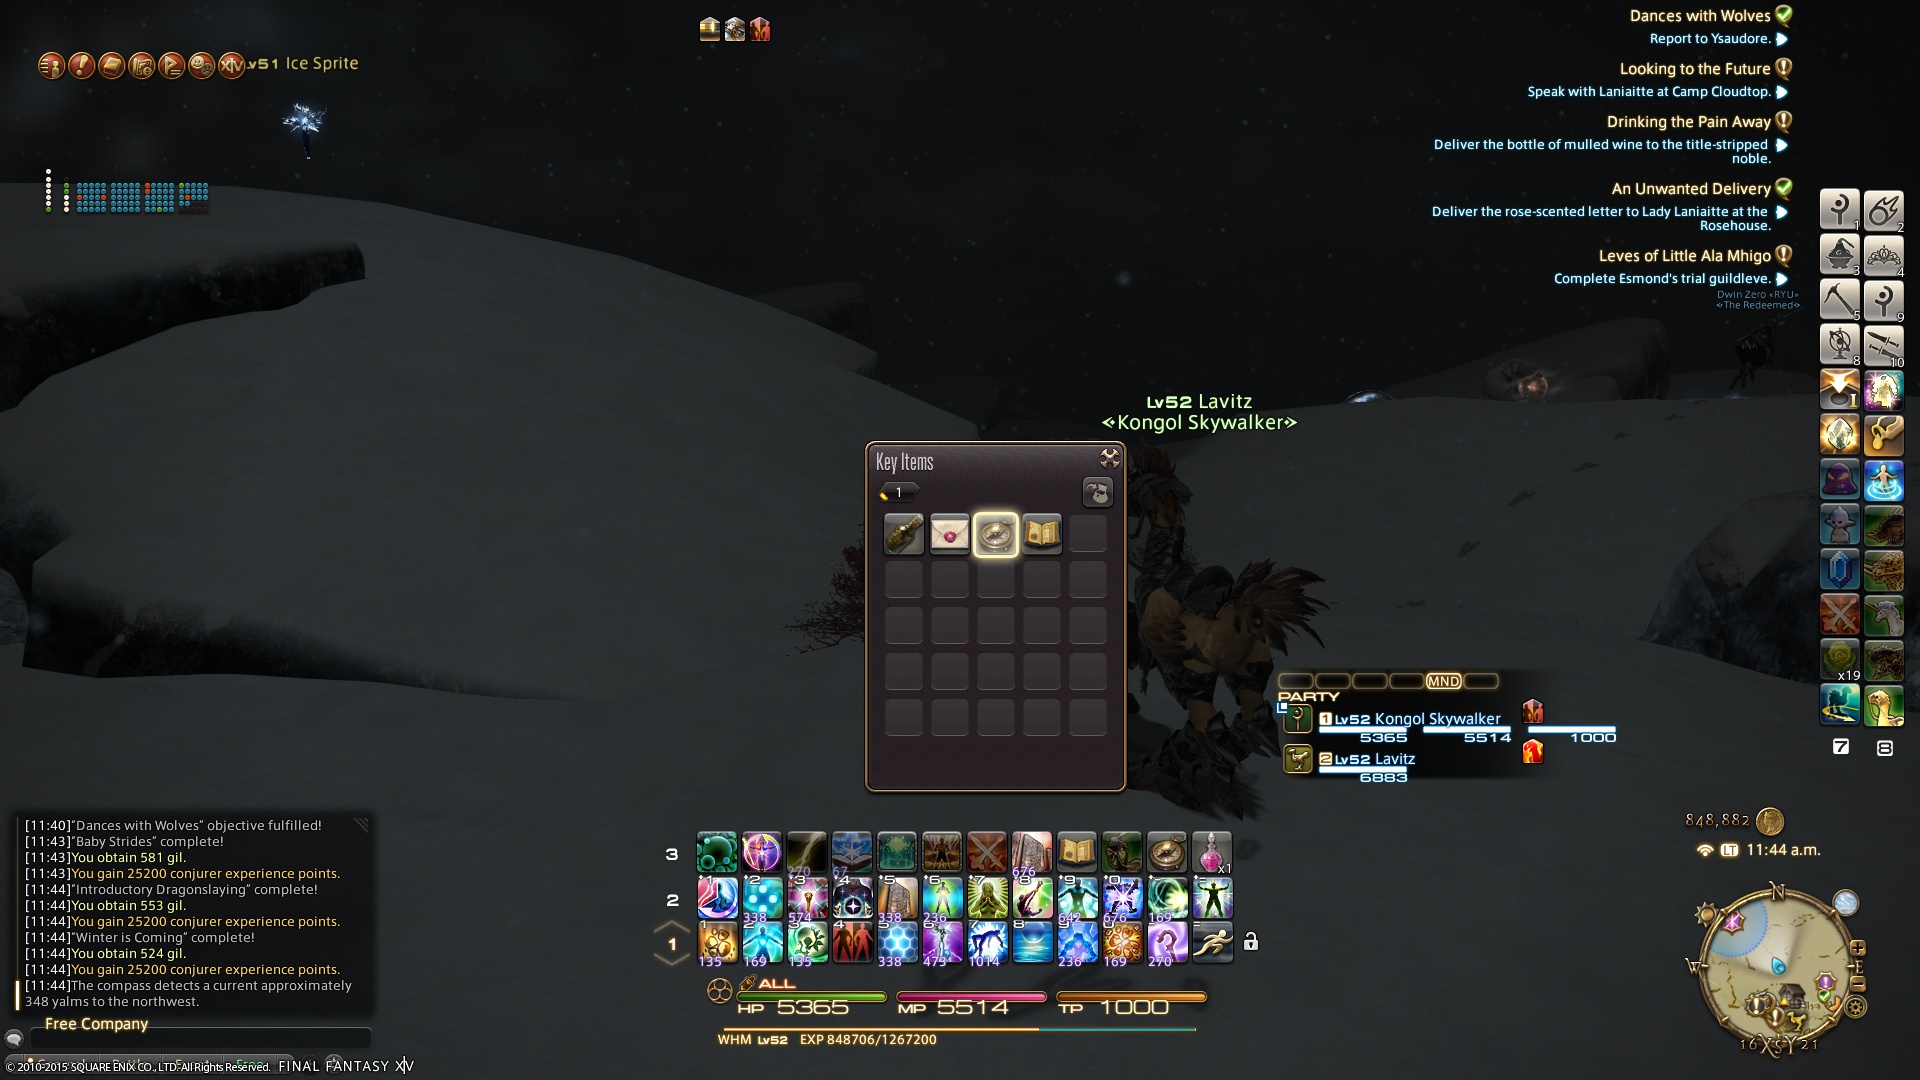 final fantasy xiv heavensward guide how to get the black chocobo and fly.